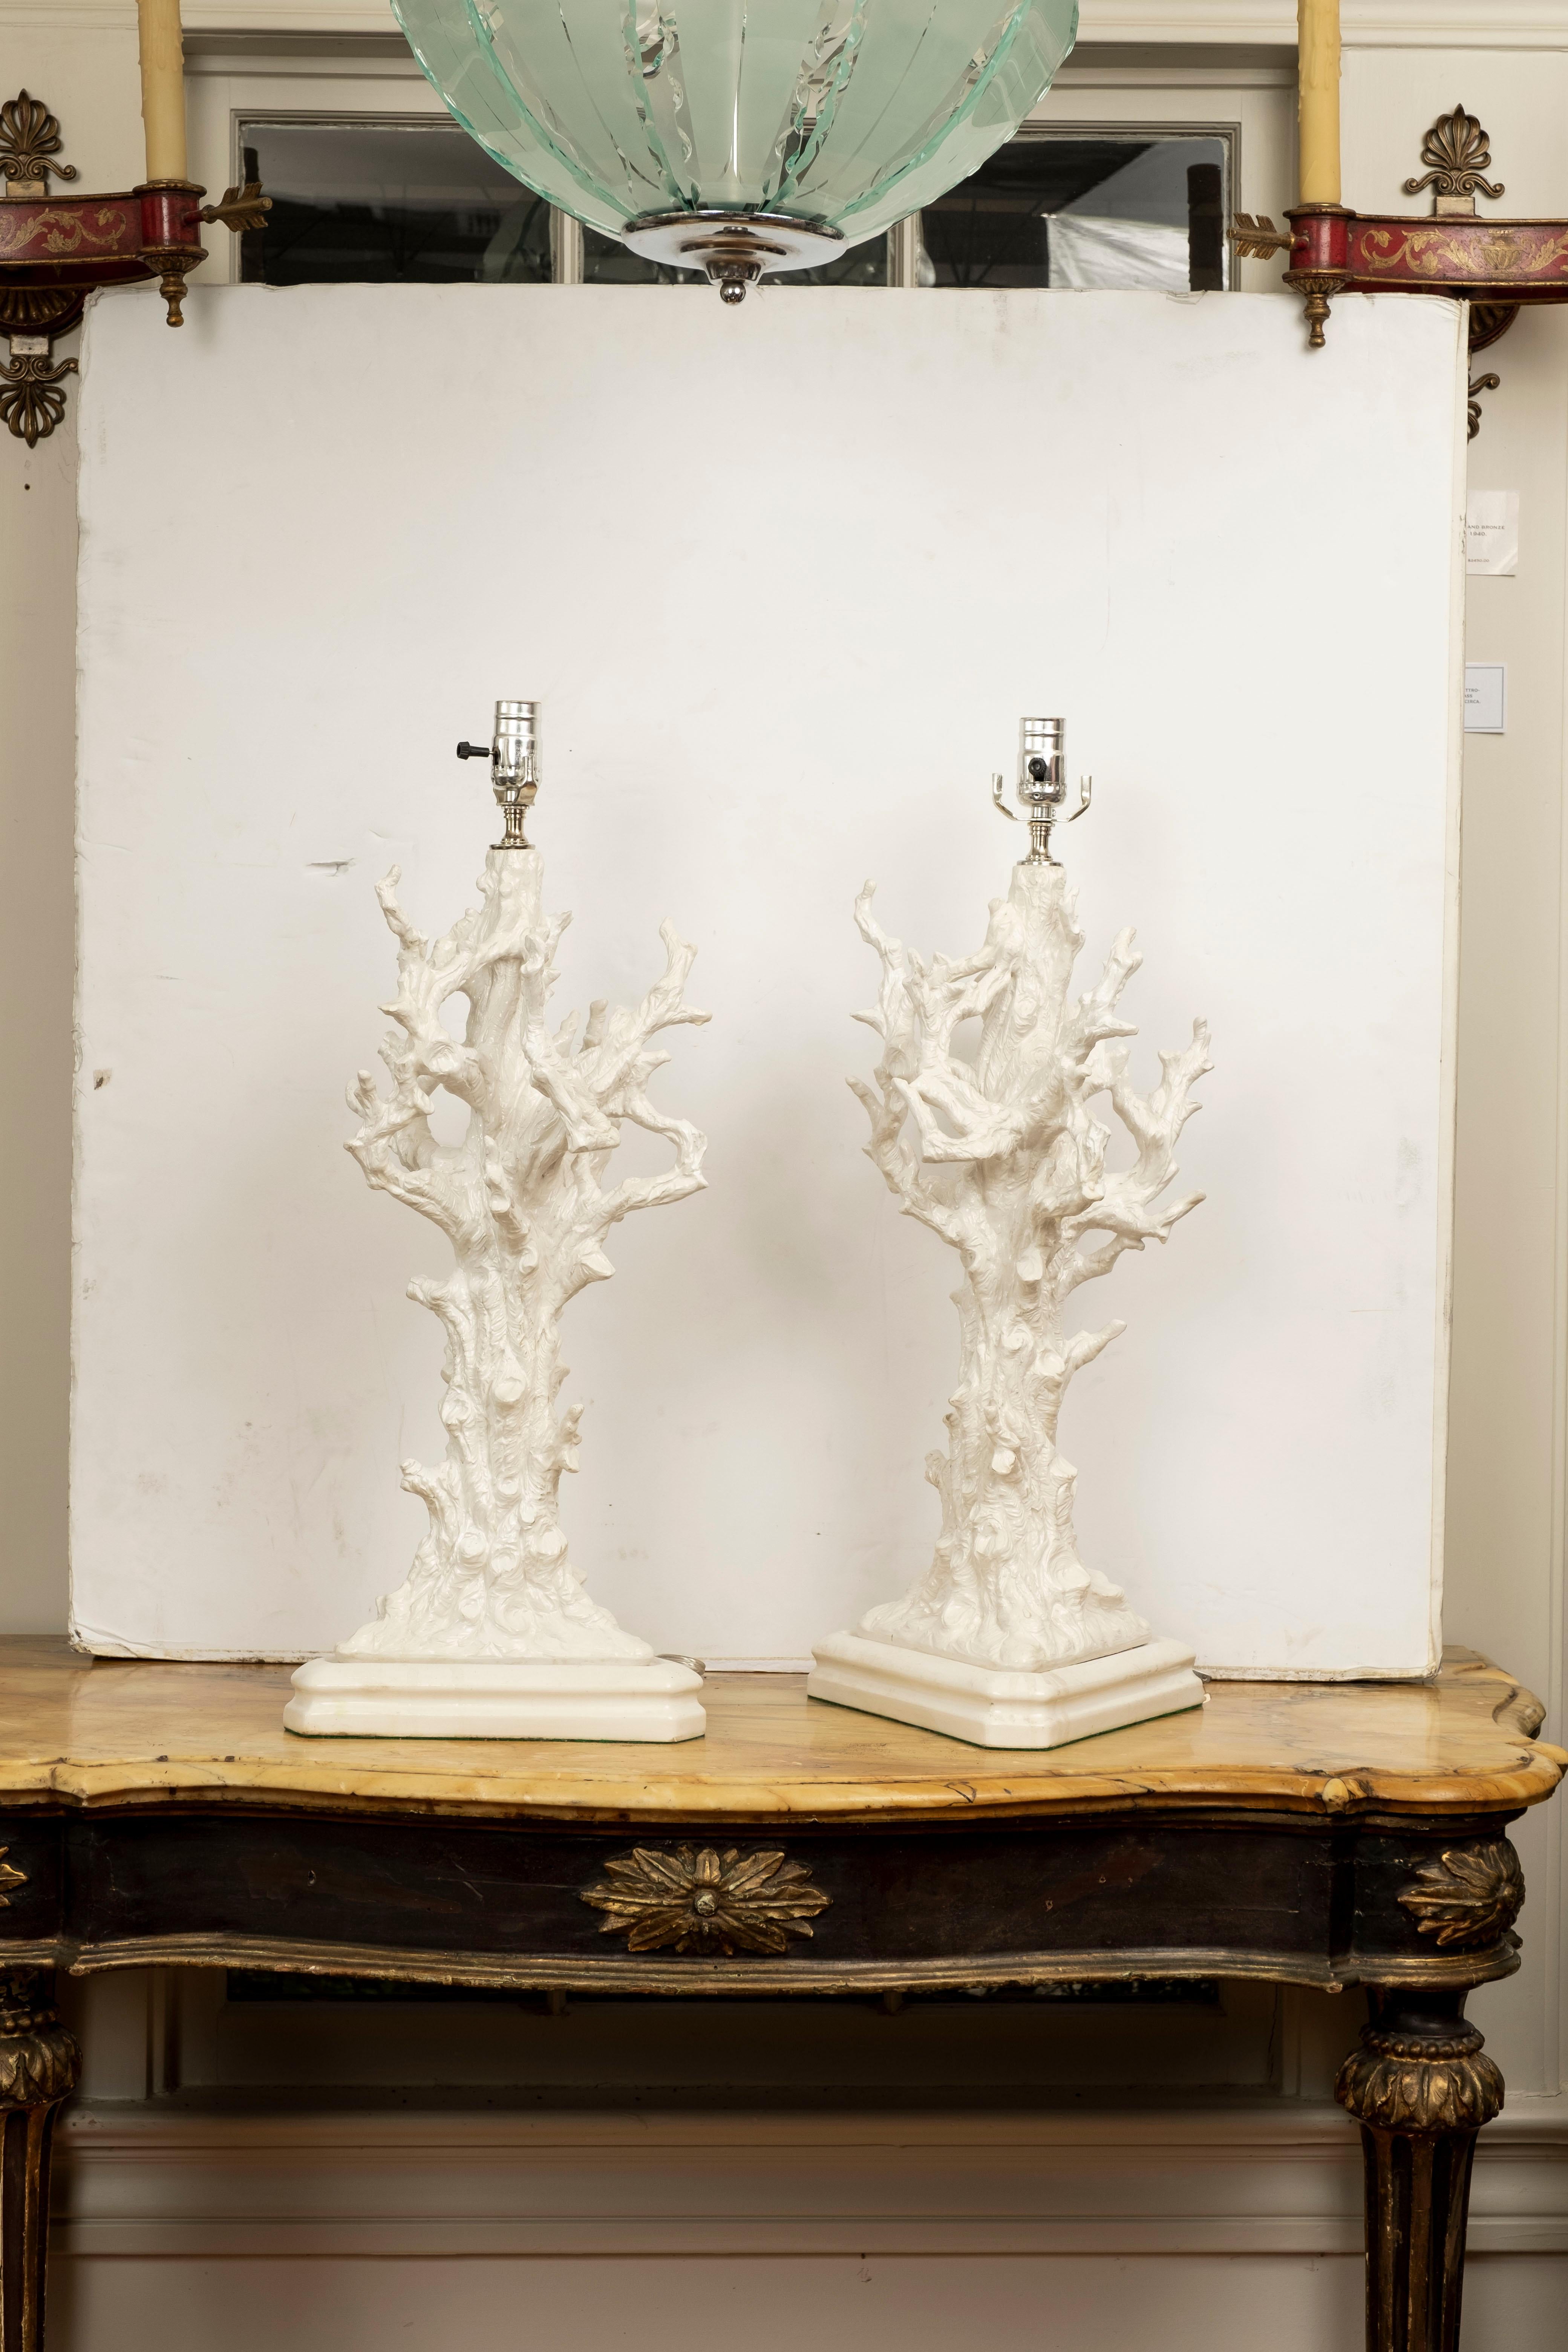 Pair of Italian white glazed porcelain faux coral lamps. These striking rare Italian organic modern lamps are most unusual and have been newly wired with new sockets and are ready for the shades of your choice. 
These lovely Italian lamps retain